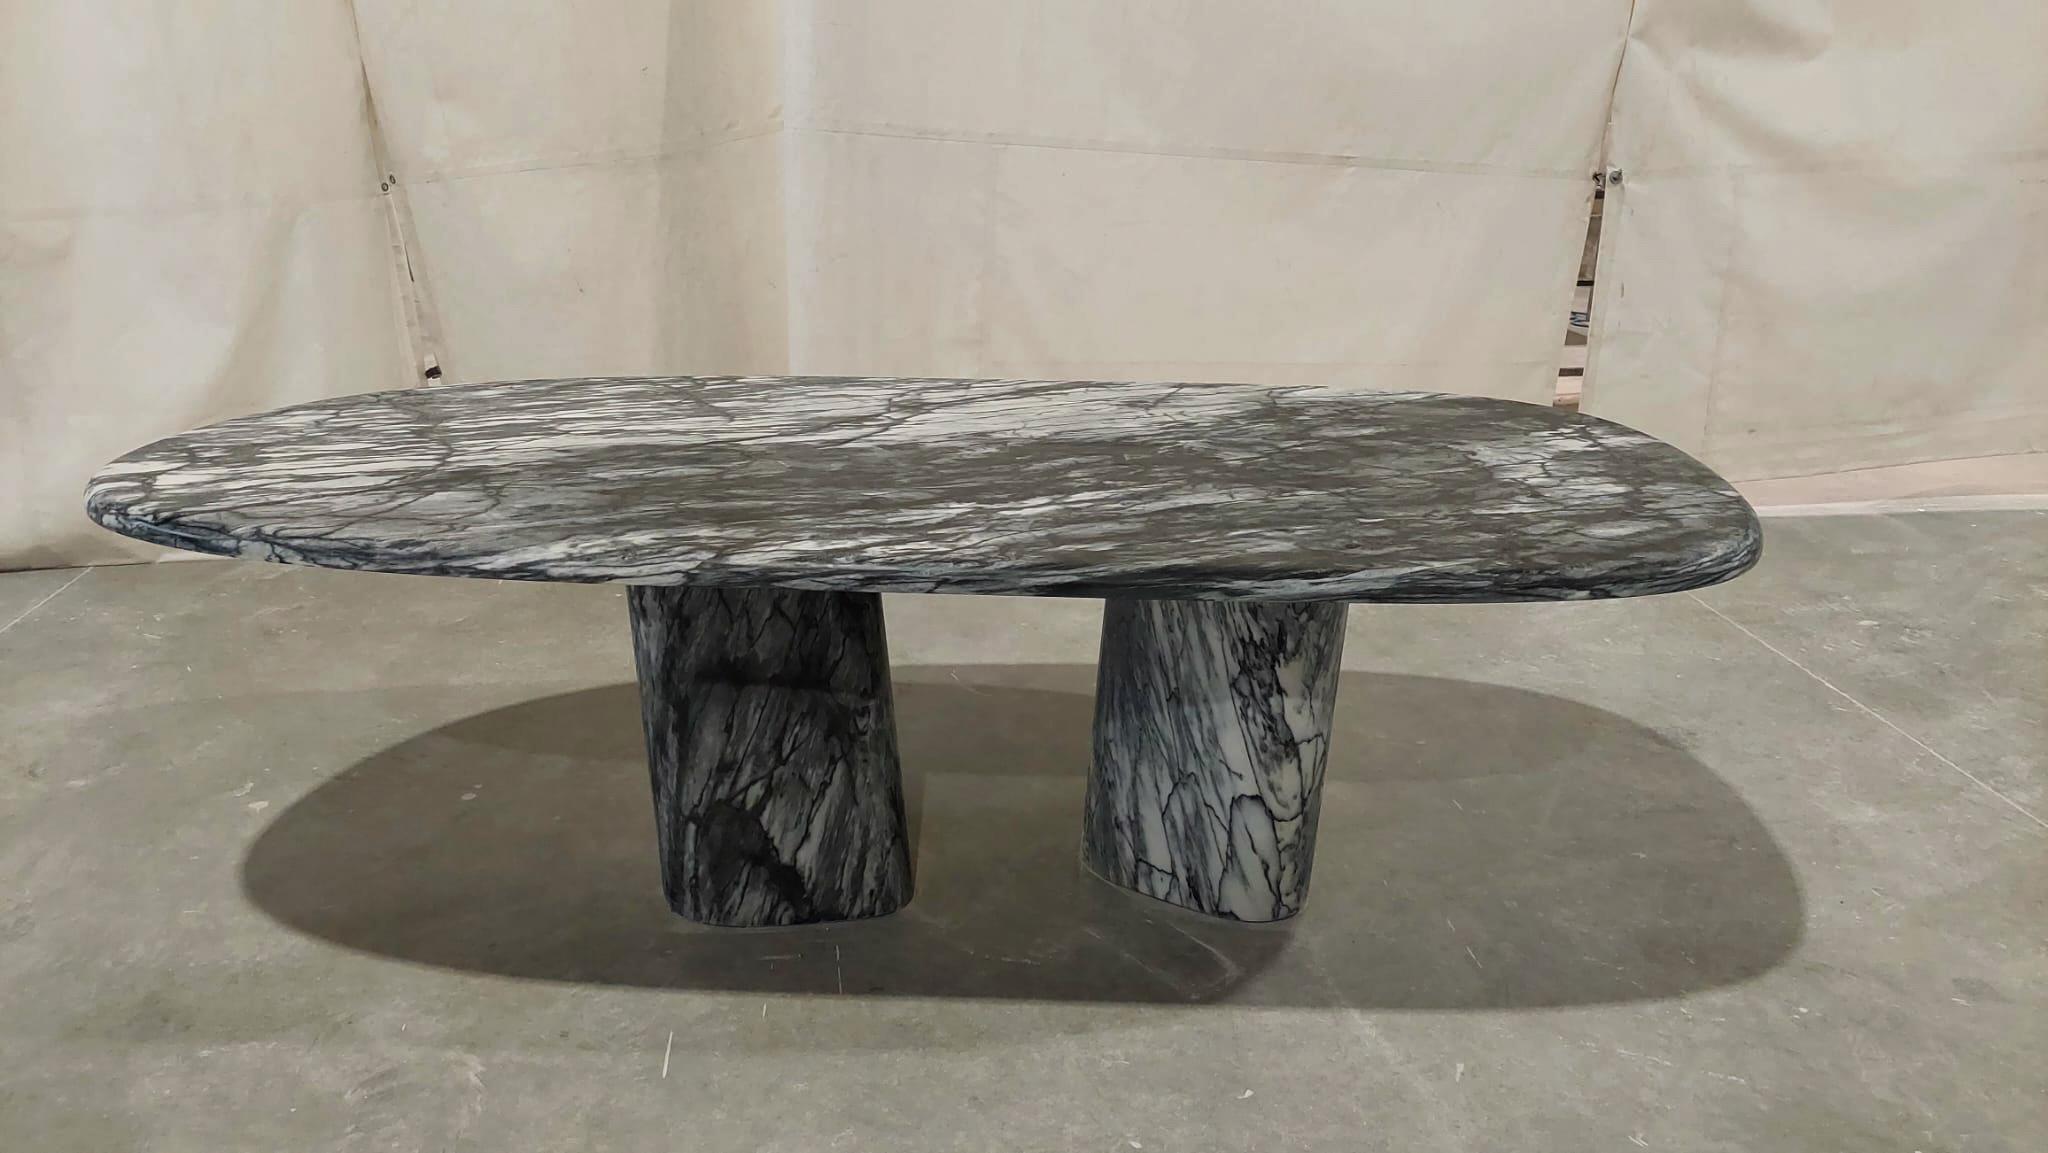 Pele de Tigre Dining Table el by Phillip Jividen
Dimensions: W 277 x D 112 x H 79 cm
Materials: Pele de Tigre Marble


Phillip’s works are about creating timeless pieces that feel familiar yet unexpected using intuitive forms that are a balance